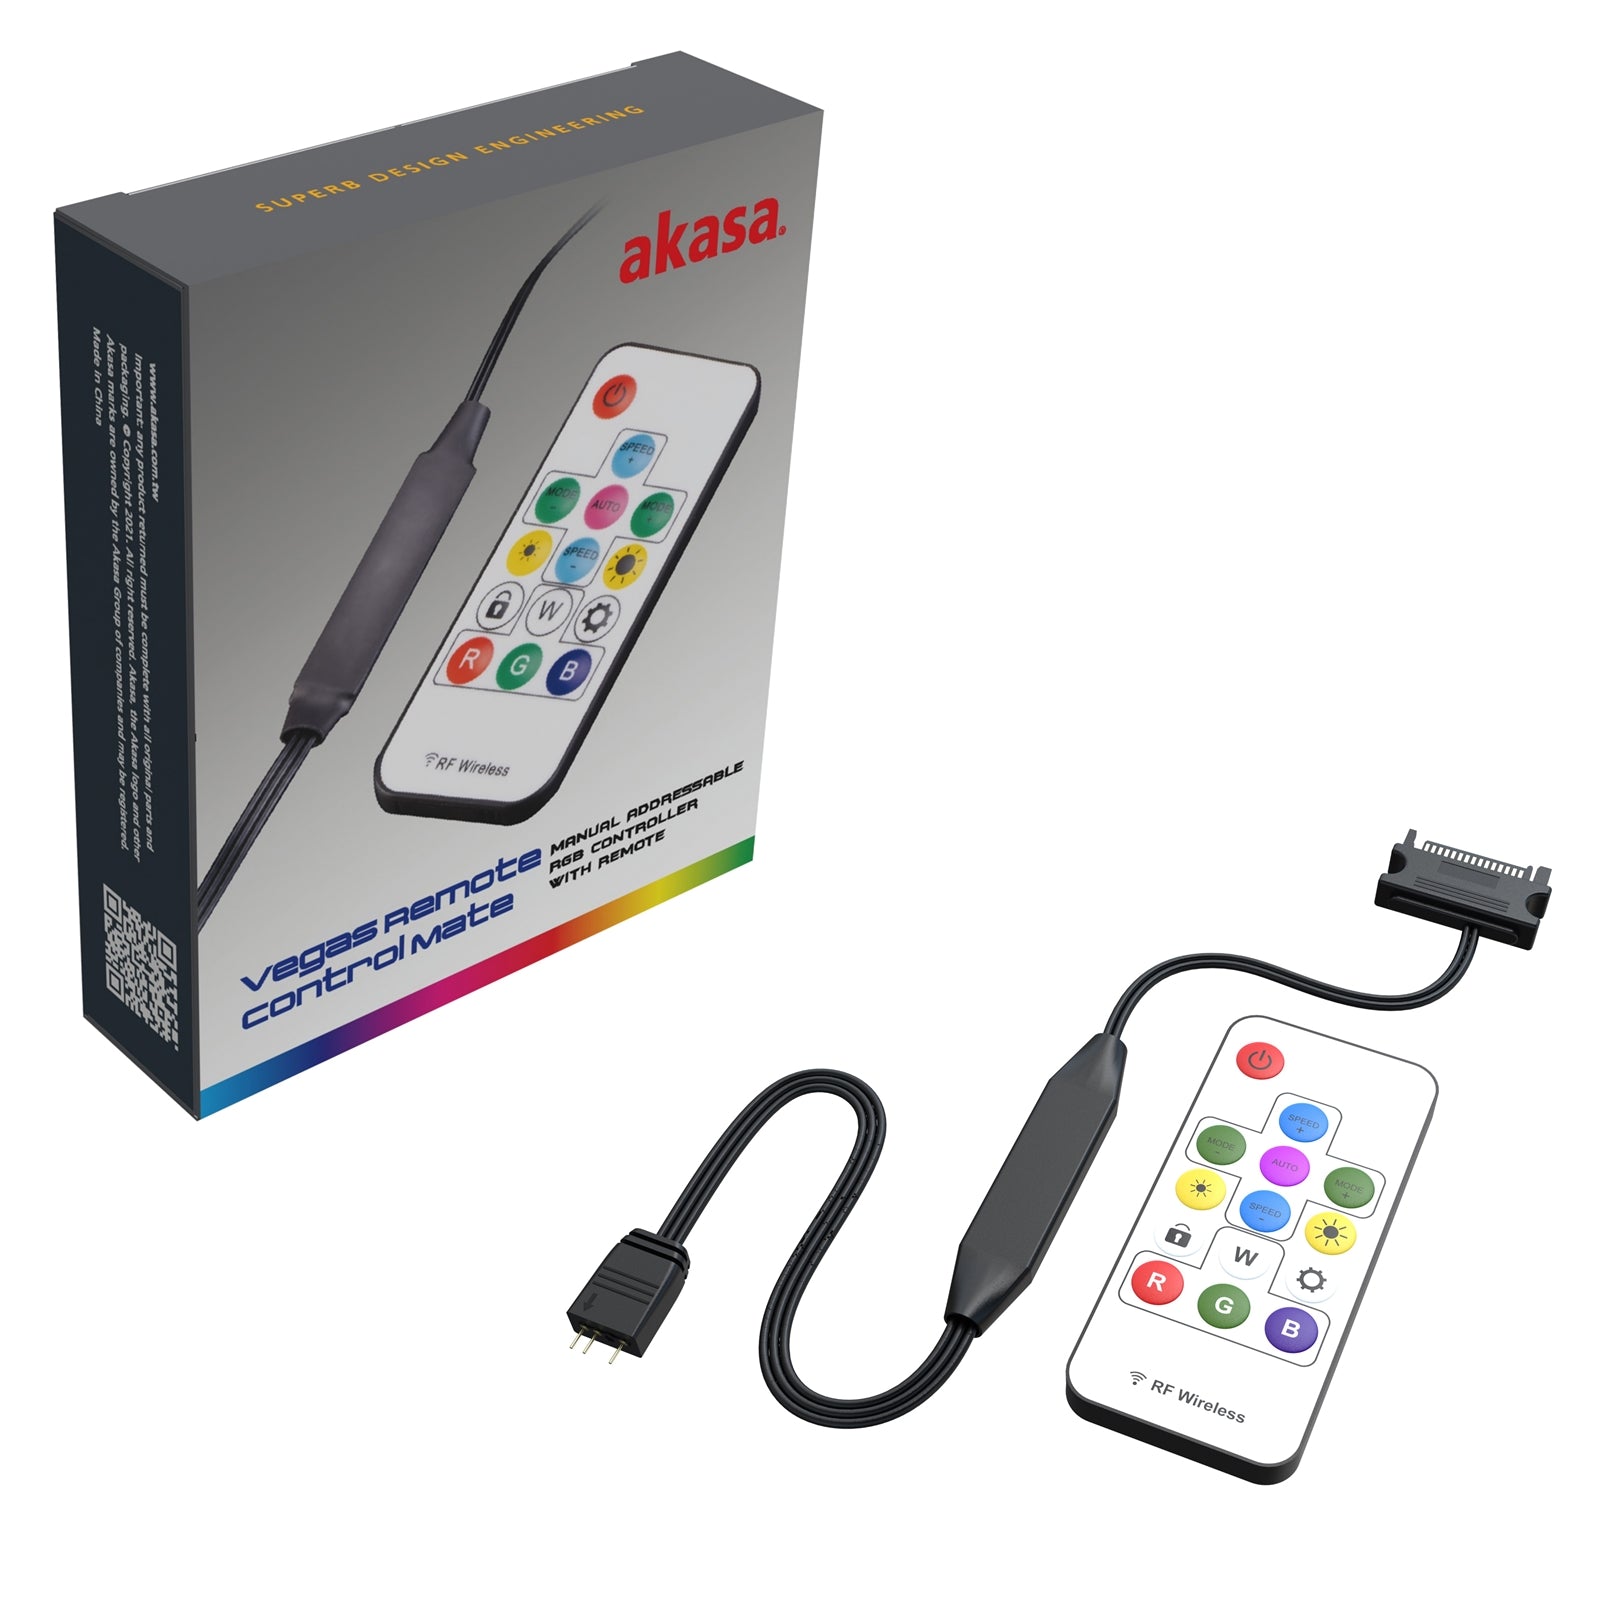 Photos - Cable (video, audio, USB) Akasa Vegas Remote Control Mate Addressable RGB Controller Cable wit 